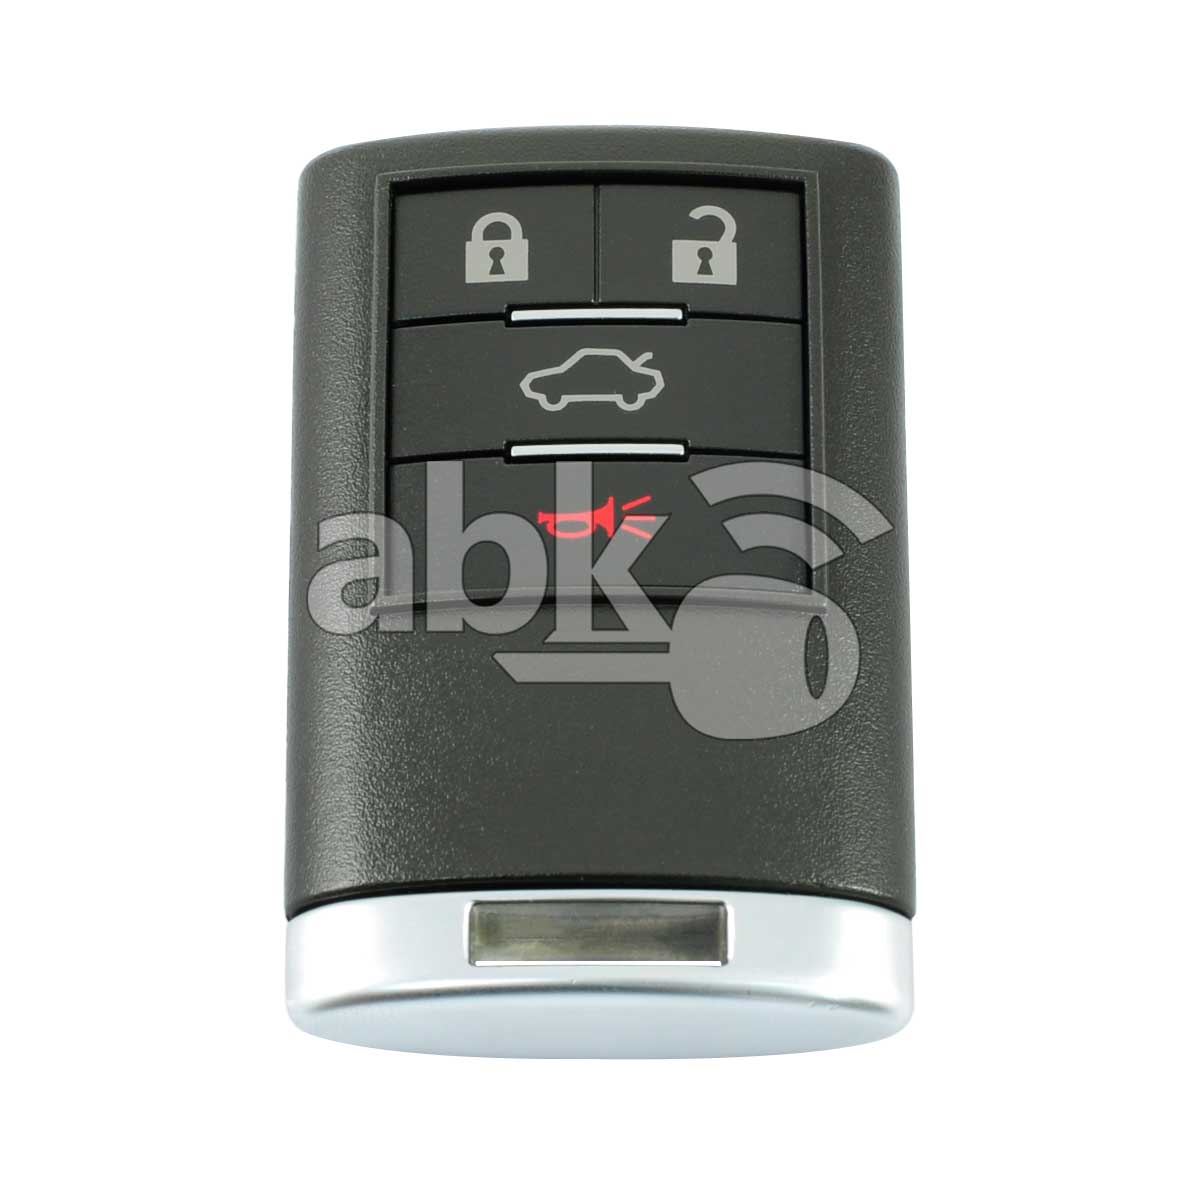 Genuine Cadillac CTS DTS 2008+ Remote Control 4Buttons 25840554 22889450 315MHz OUC6000066 - ABK-727